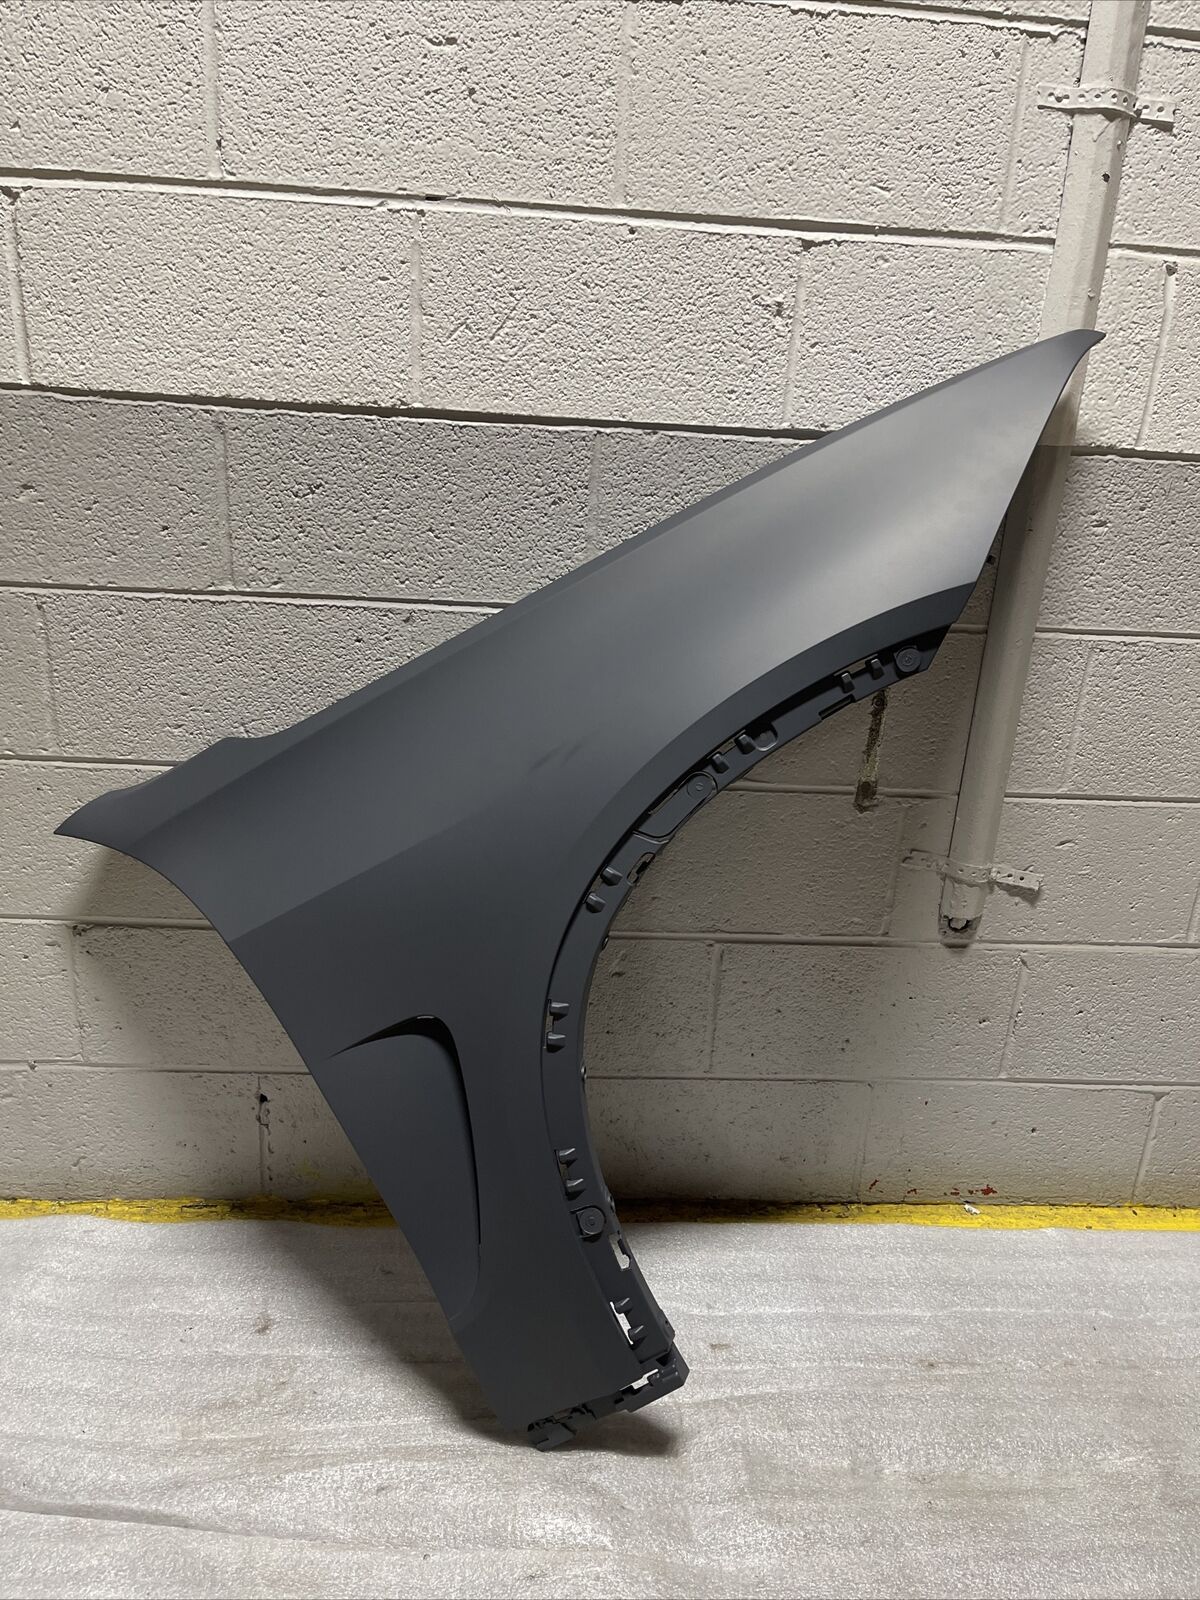 🚘New 2013-2018 BMW X5 F15 Front Right Fender 🛞